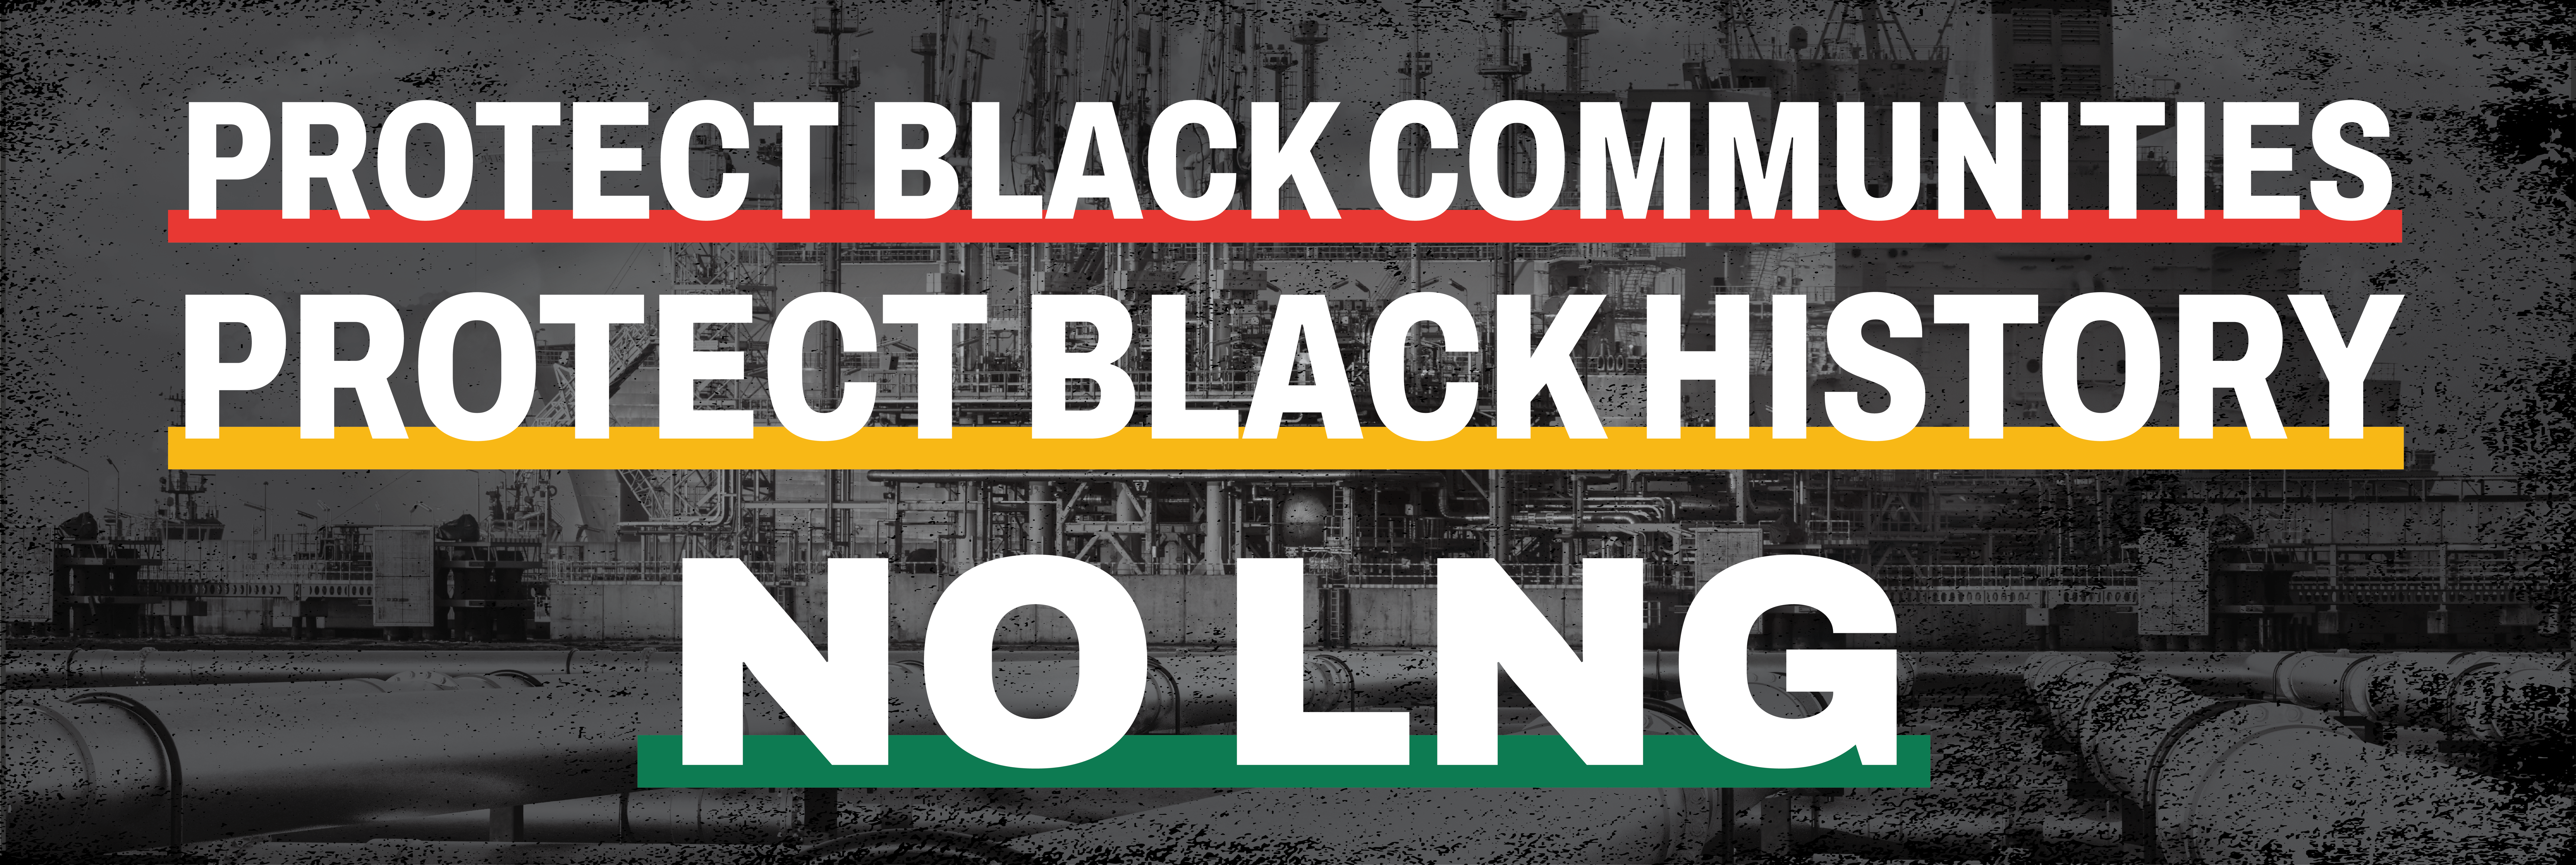 white blocked letters underlined with red, yellow, and green read: Protect Black Communities Protect Black History NO LNG behind the words is a slightly transparent Black and white image of machinery at an LNG industrial site.